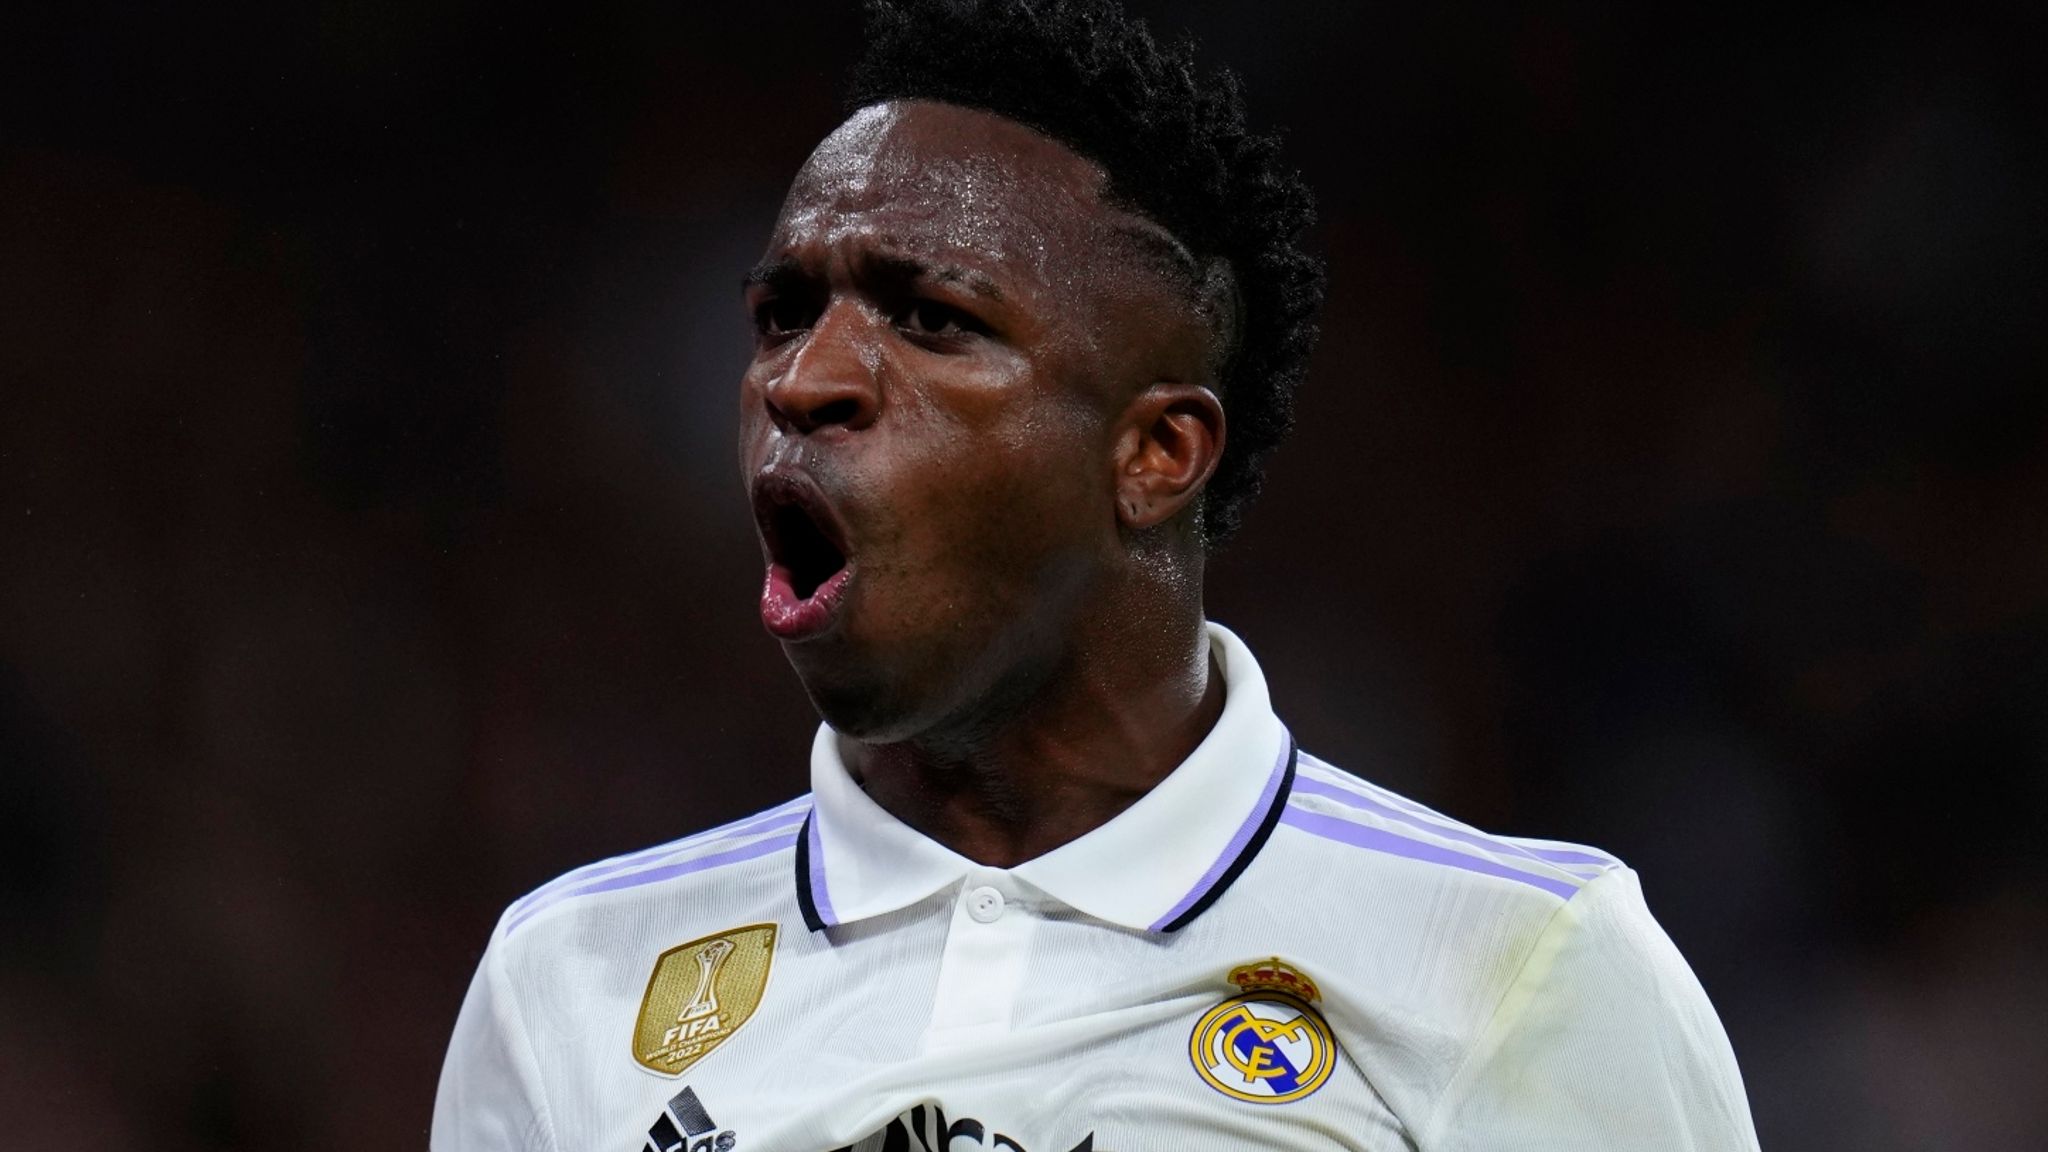 Has Camavinga been one of Real Madrid's best players? Is Vinicius